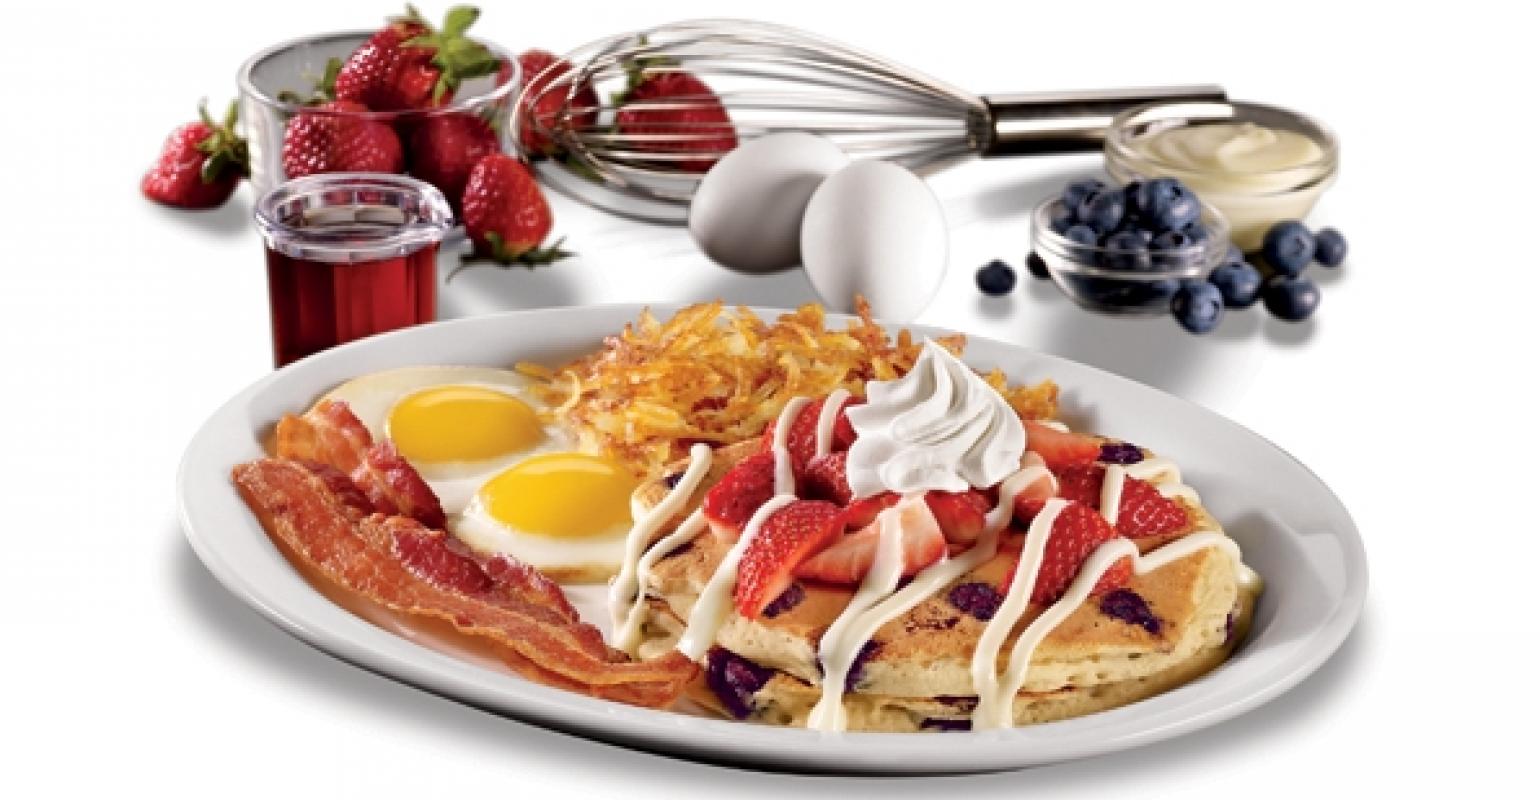 IHOP launches Bacon Obsession menu